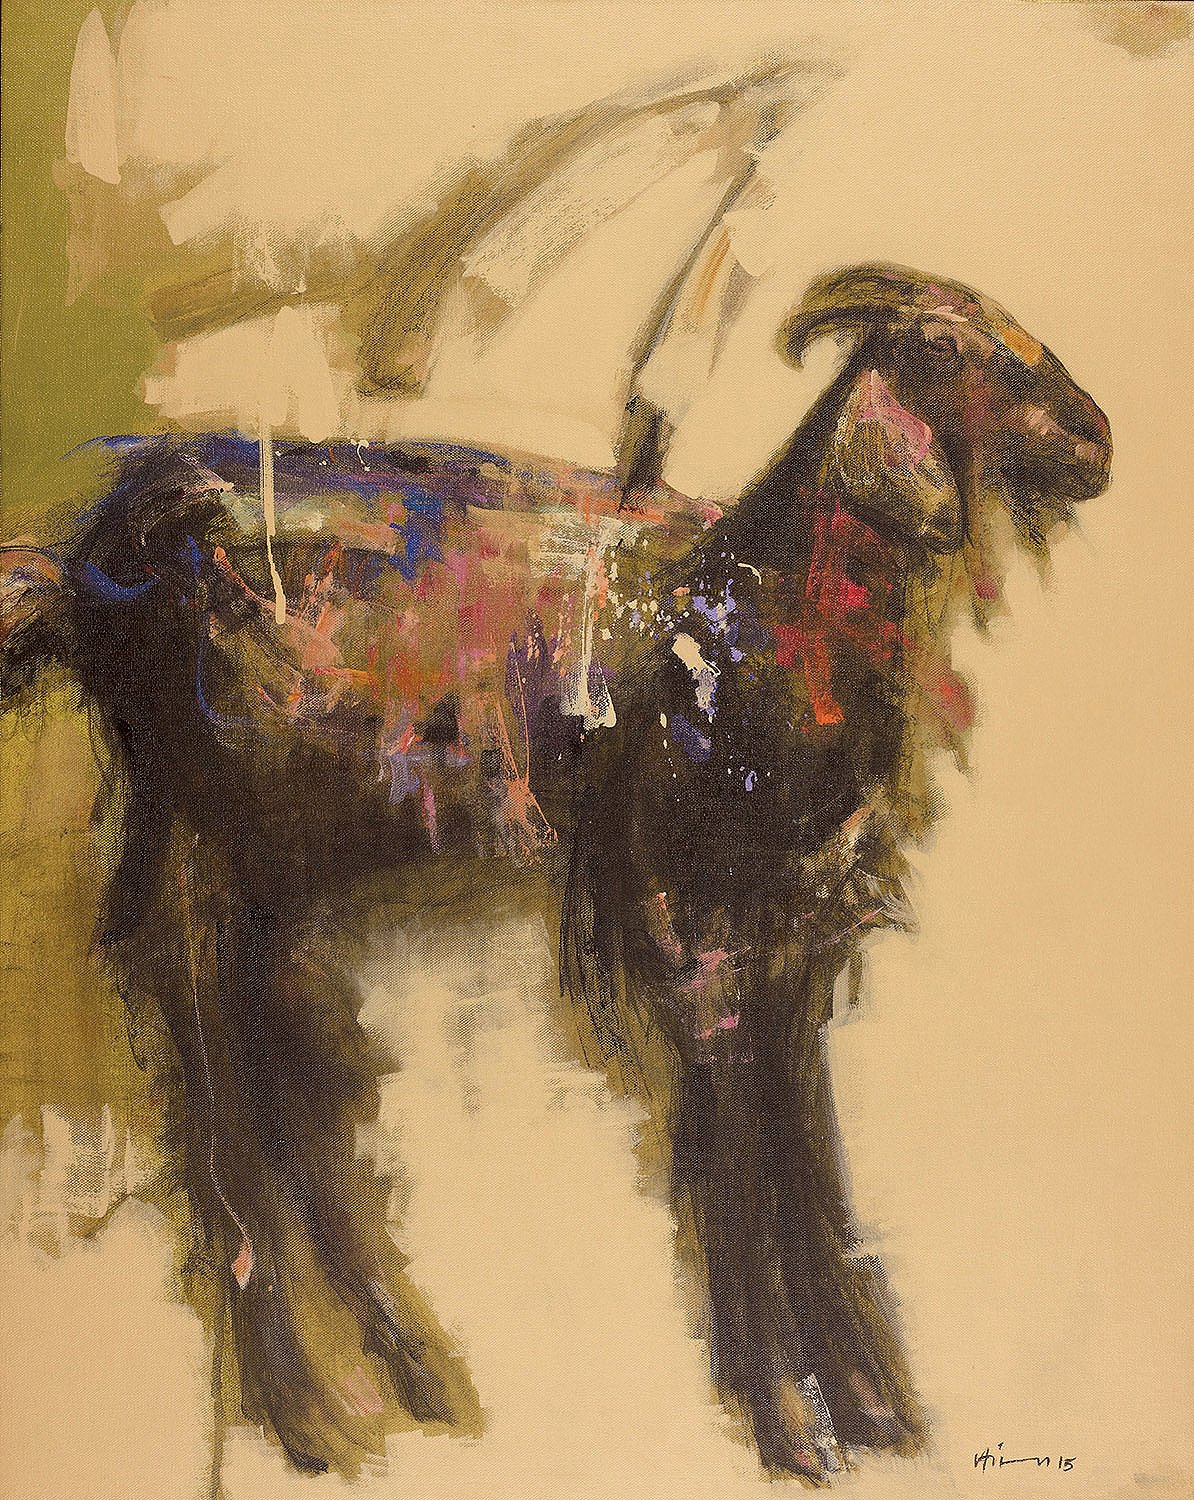 Wild goat|Ajay Deshpande- Acrylic on Canvas, 2015, 30 x 24 inches